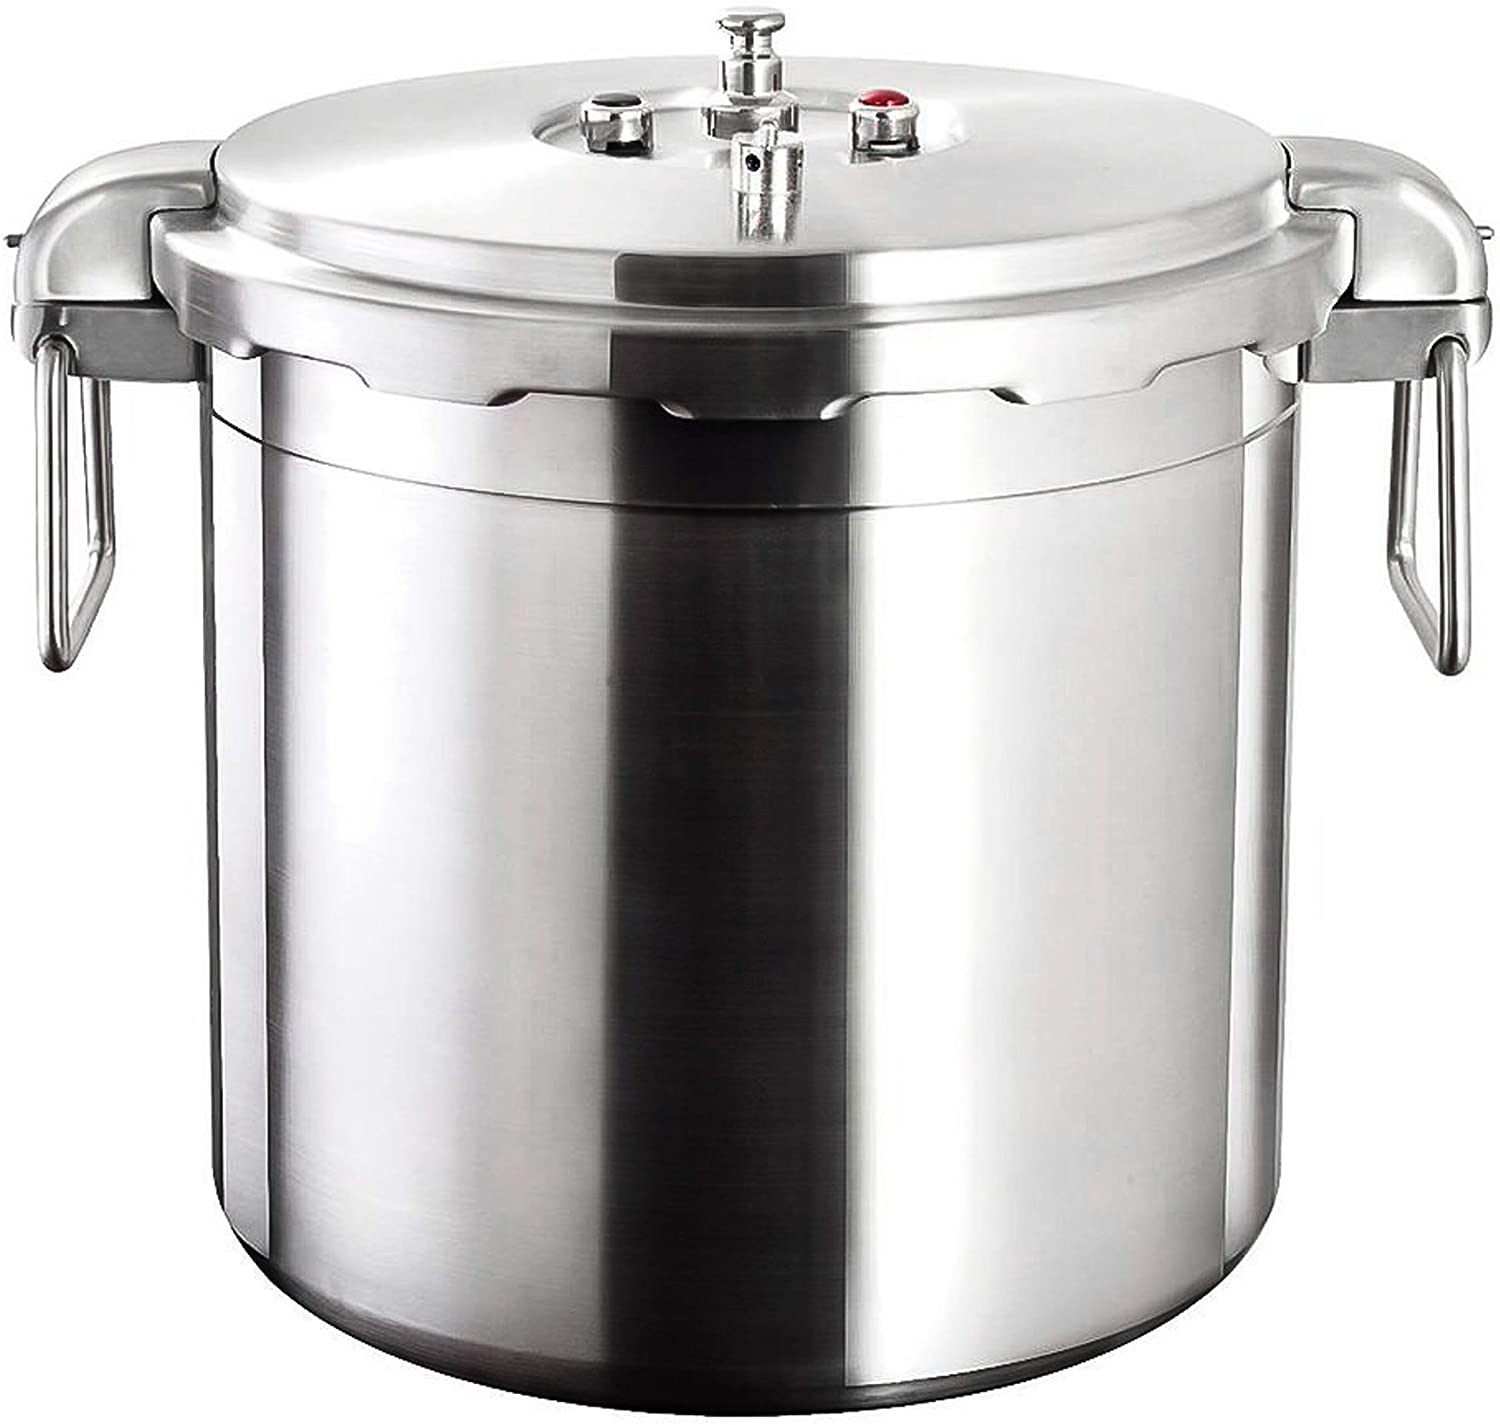 Stainless steel pressure cookers nonstick gall 5L large capacity cooker